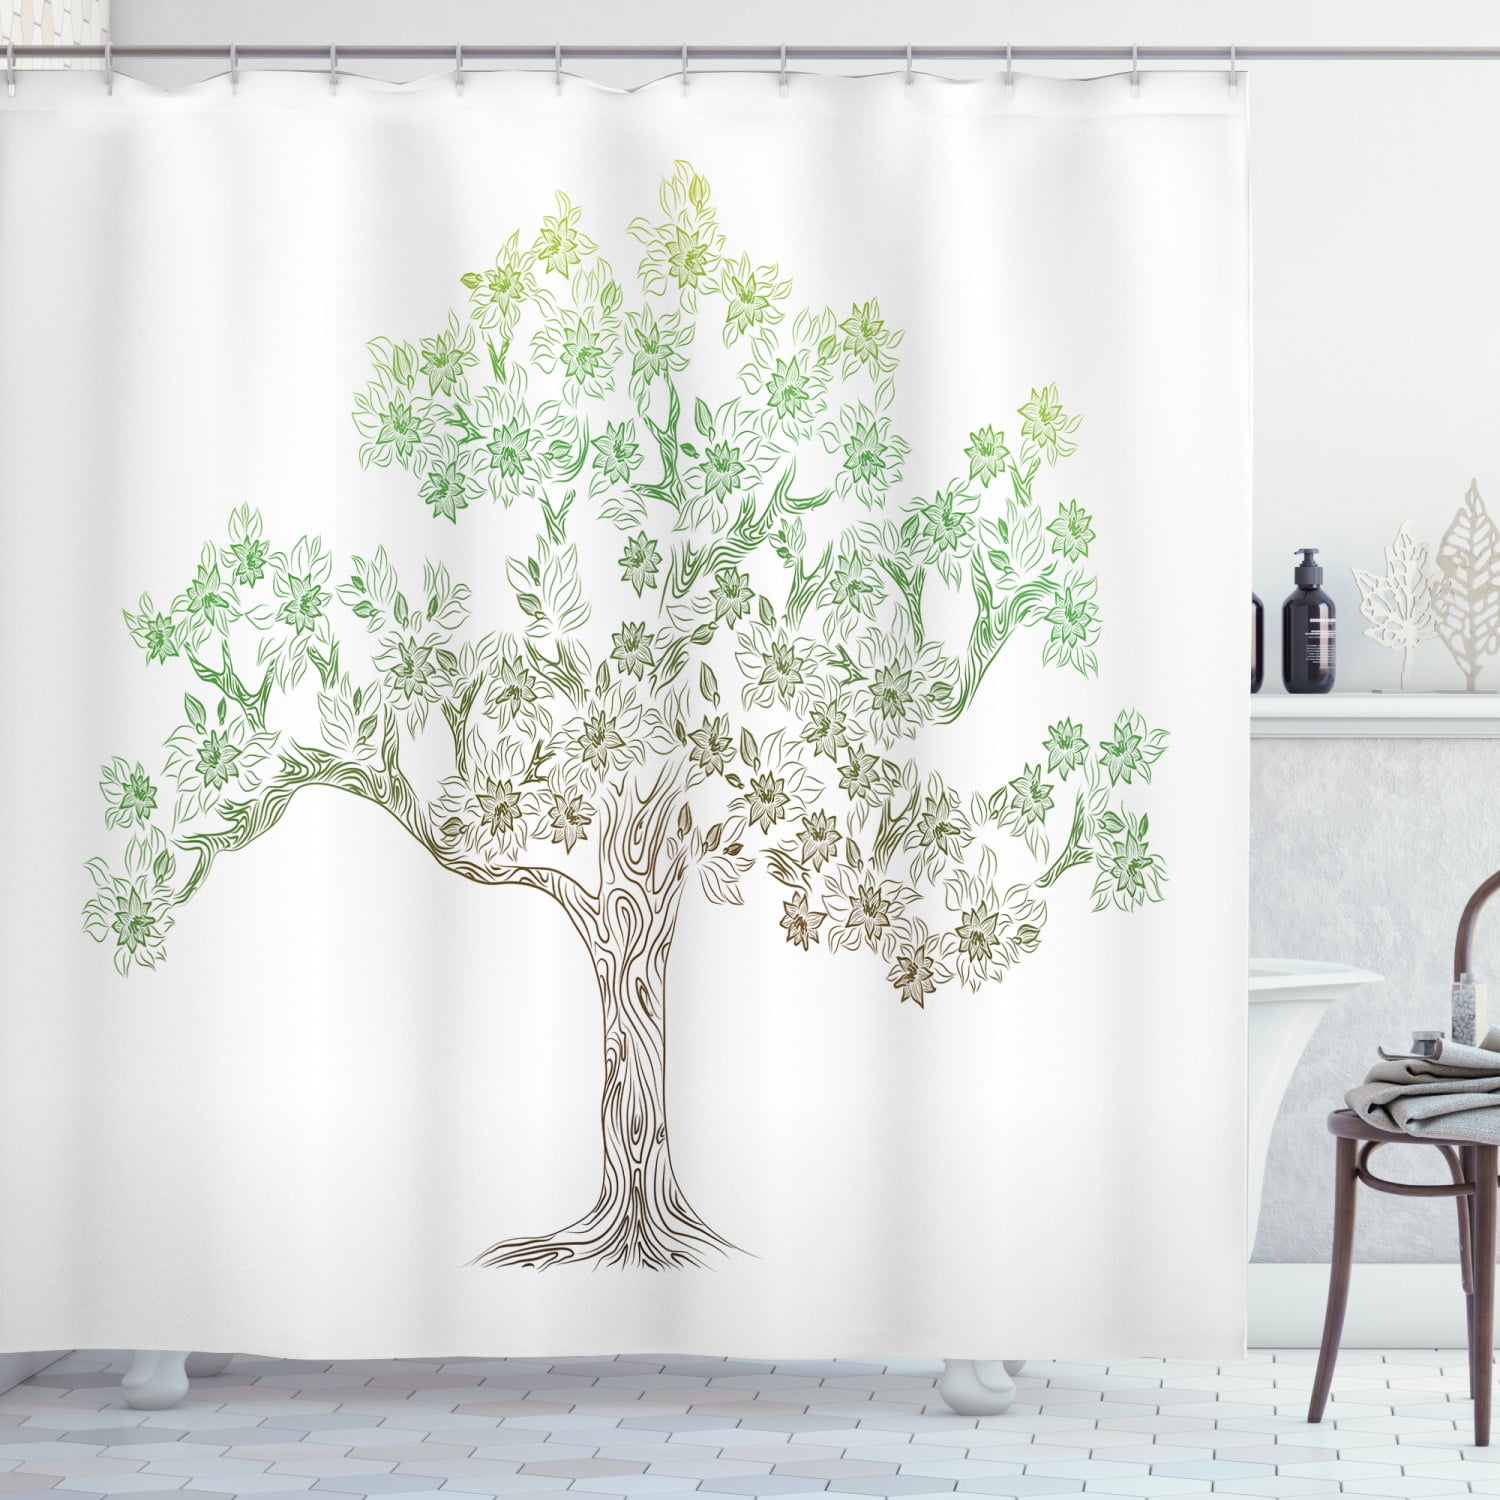 Willow Tree Shower Curtain Weeping, Weeping Willow Tree Shower Curtain